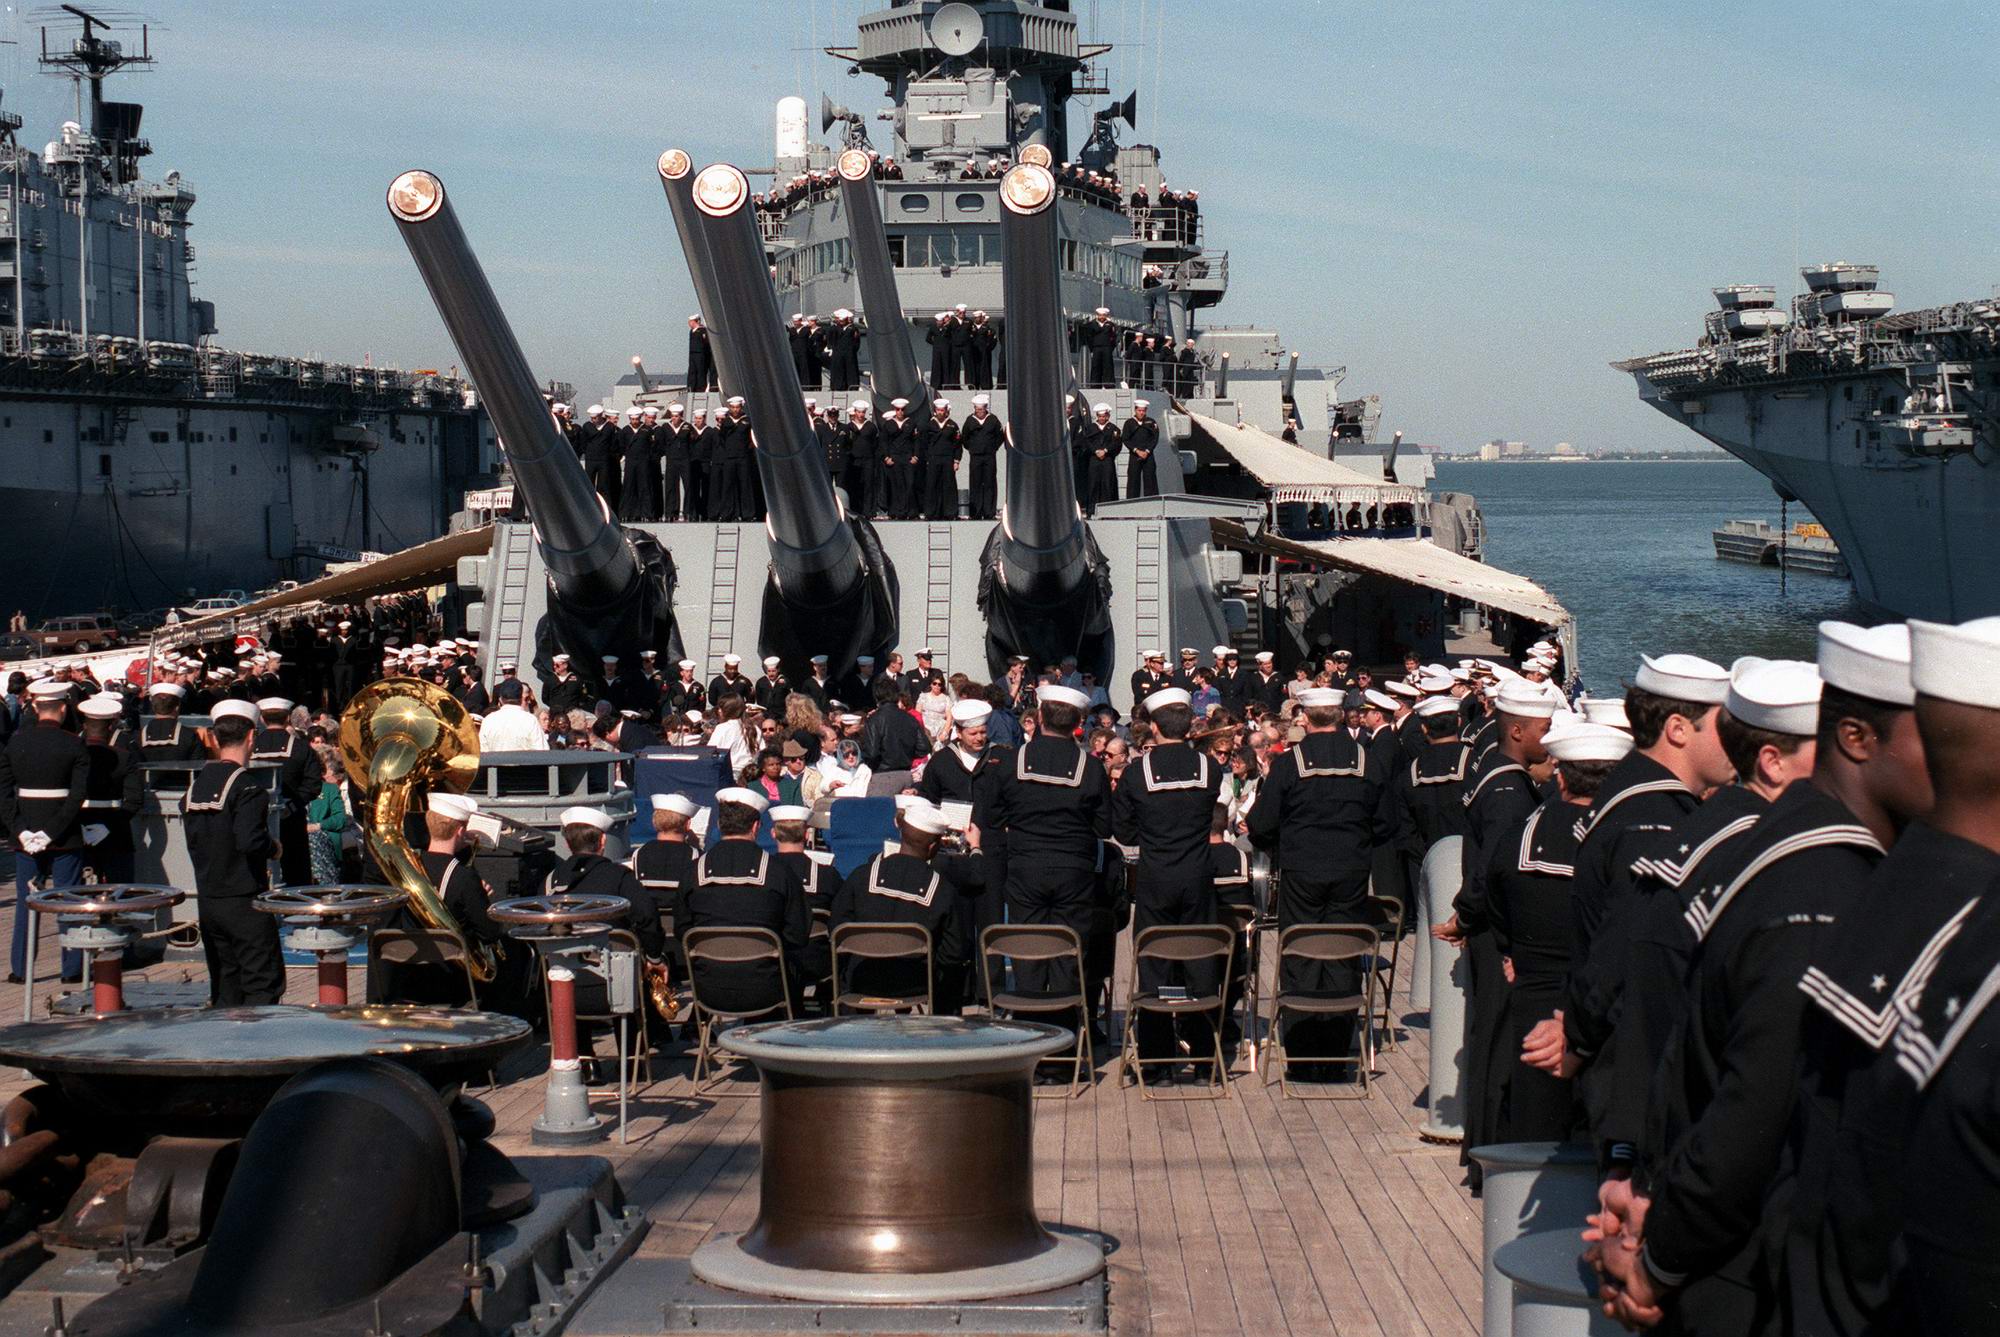 Families of 47 sailors killed in the April 19, 1989, explosion aboard the USS IOWA (BB-61) attend a shipboard ceremony with the IOWA's crew on the one-year anniversary of the explosion.jpg